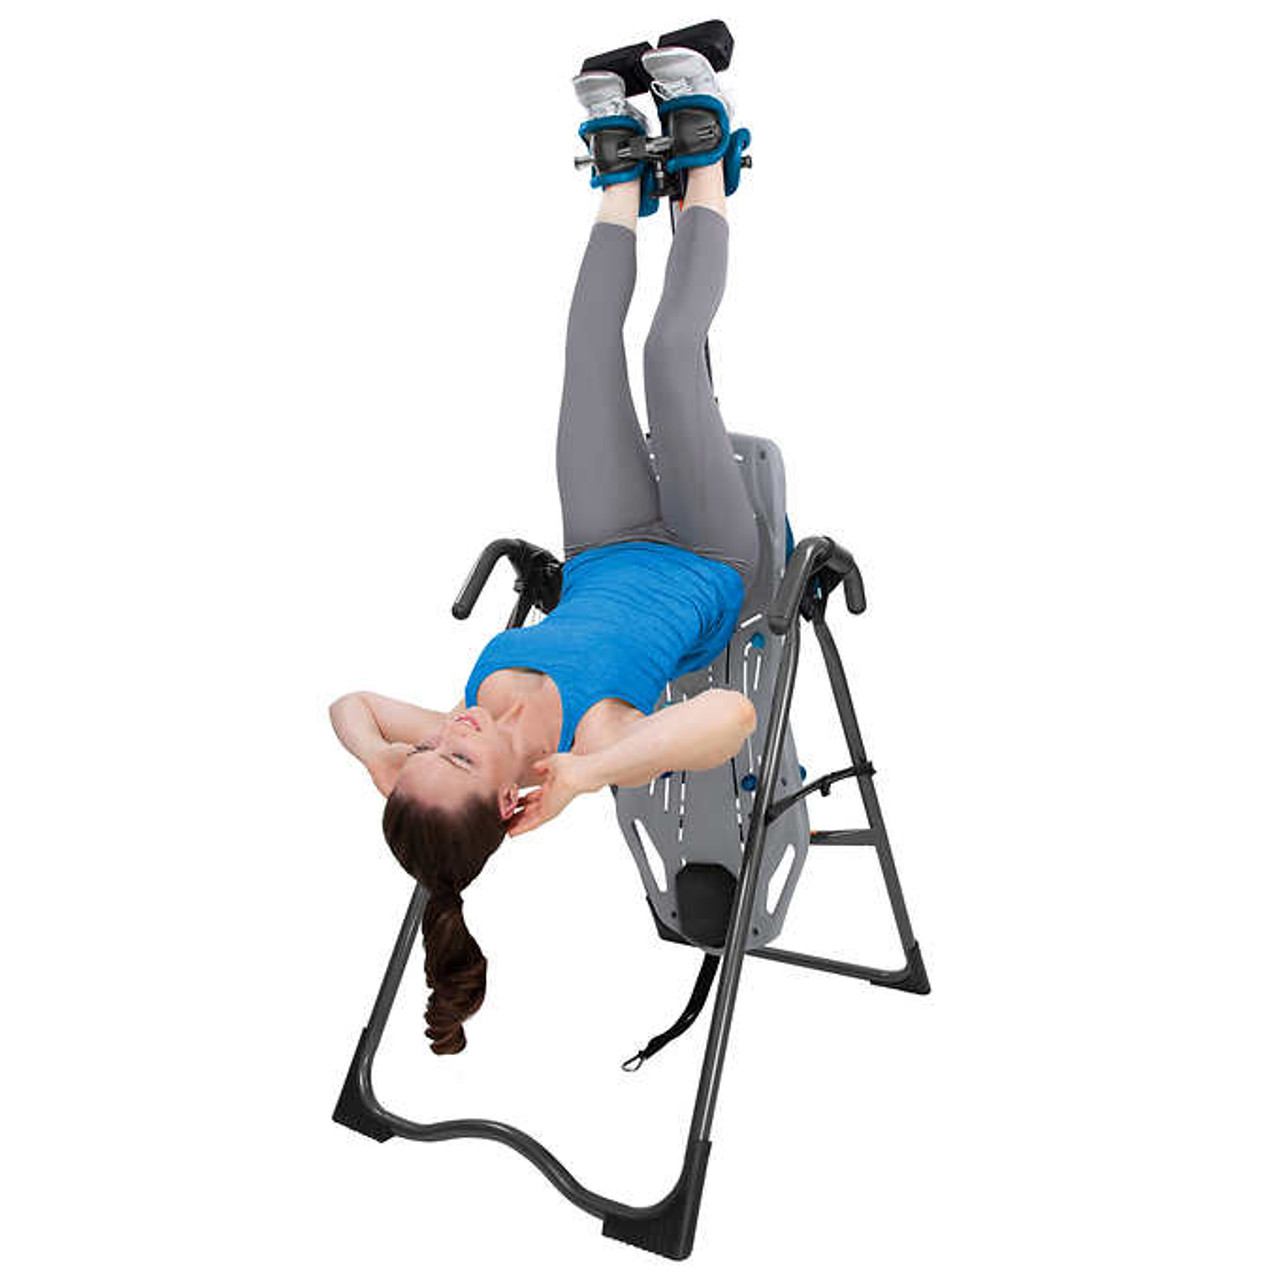 Teeter Fitspine X1F Inversion Table - Premium Inversion Therapy with FitSpine FlexTech Bed - Chicken Pieces